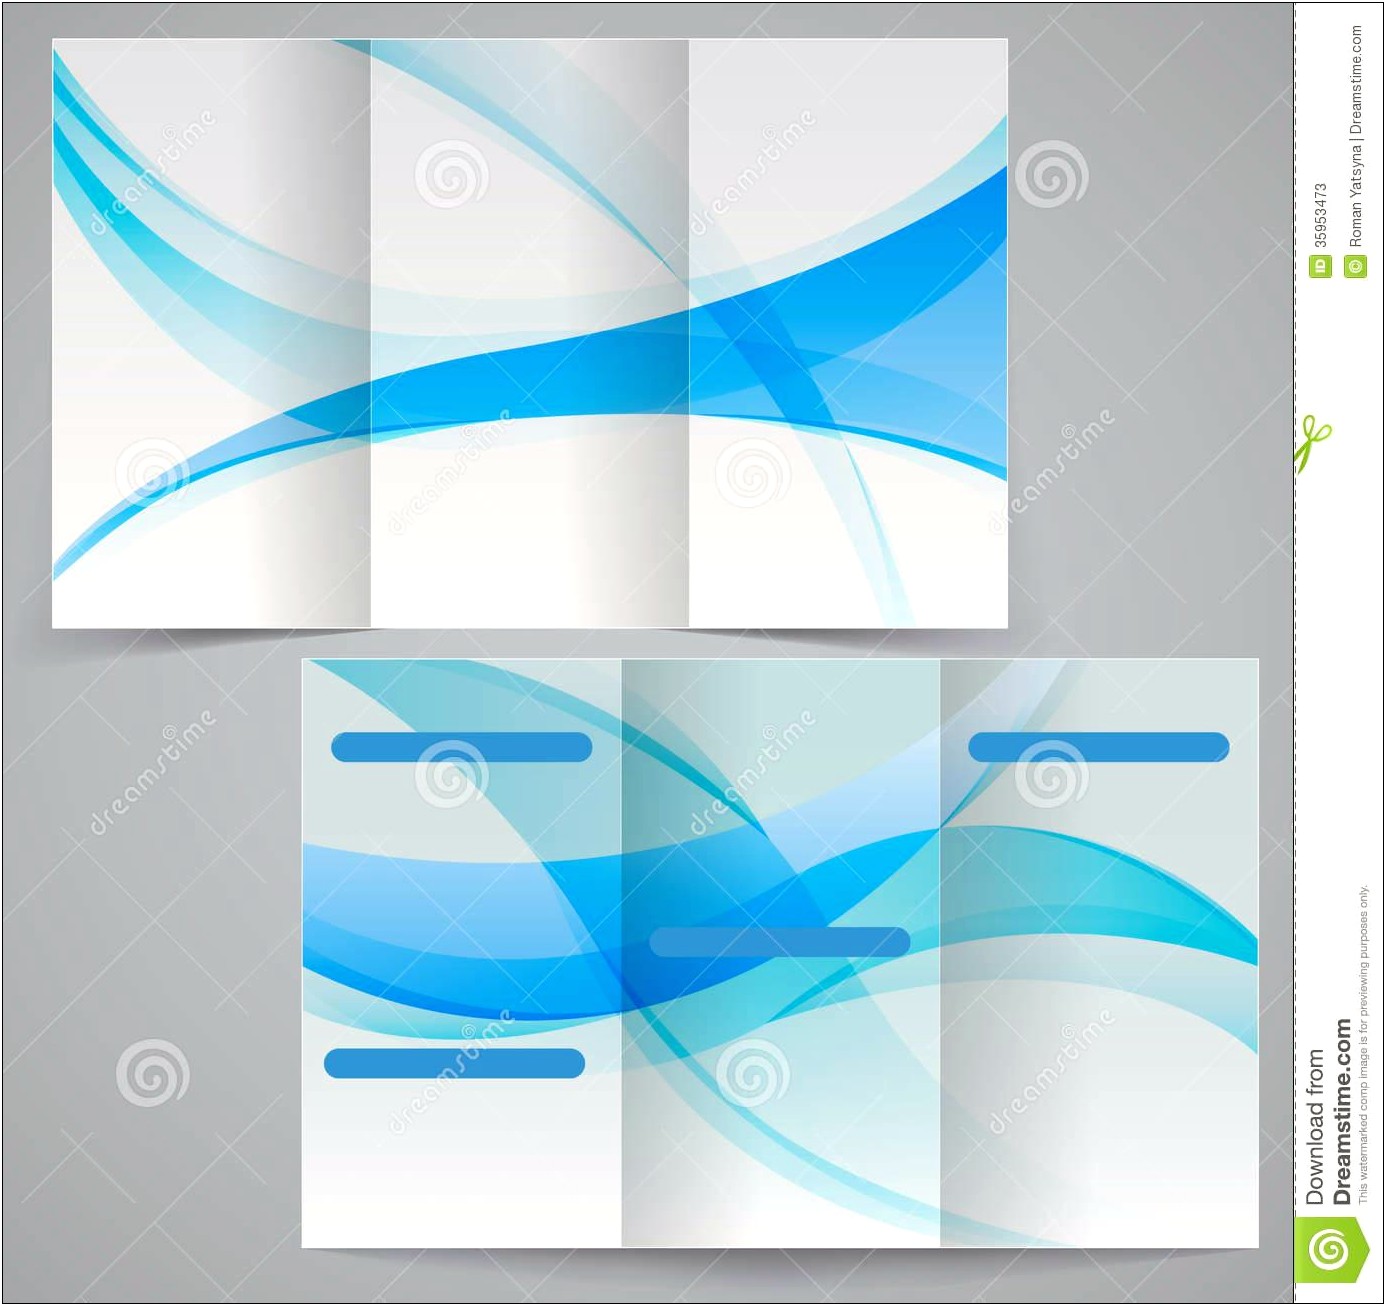 Brochure Templates Medicine Trifold Free Download For Publisher